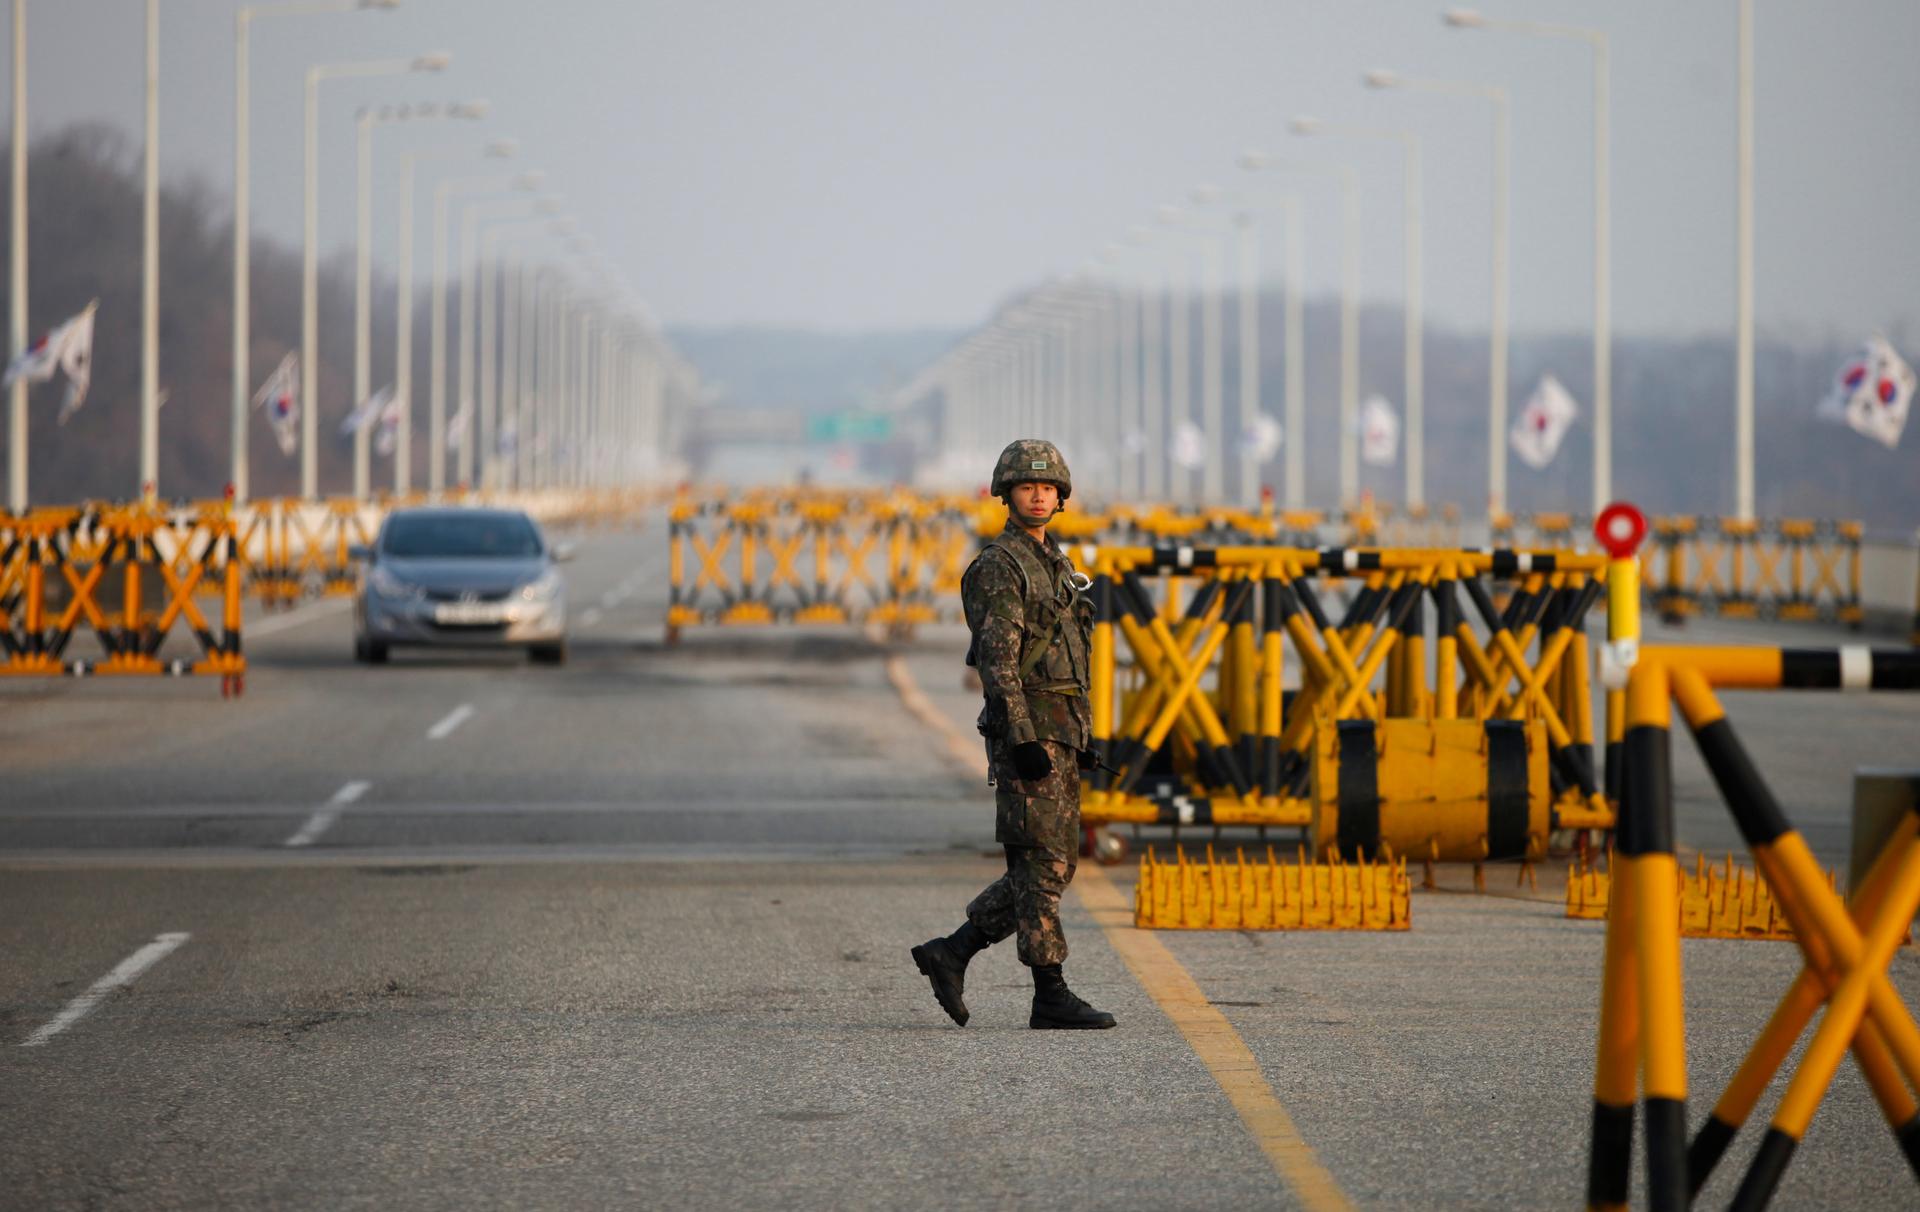 A South Korean soldier patrols at a checkpoint on the Grand Unification Bridge, which leads to the demilitarized zone separating North Korea from South Korea, in Paju, north of Seoul, April 8, 2013.